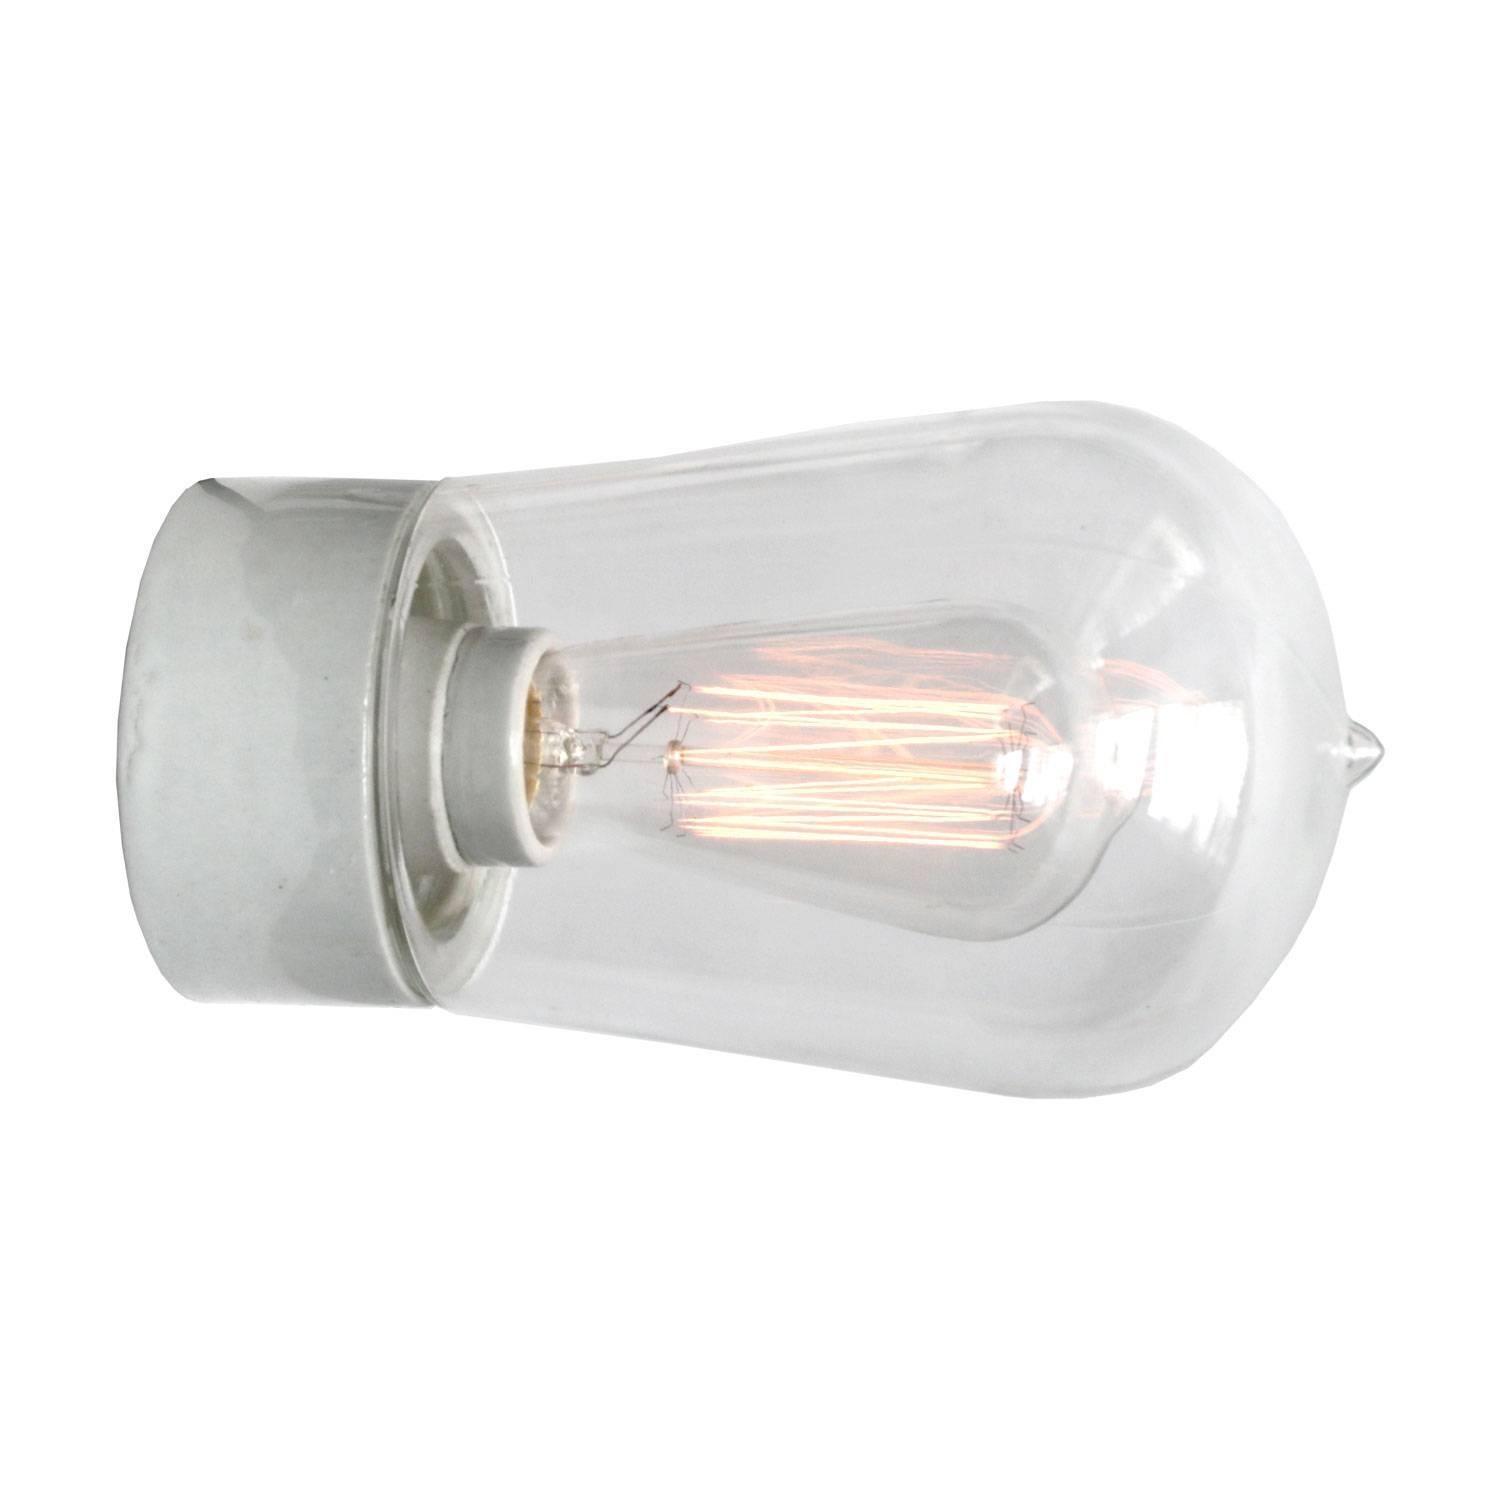 Industrial ceiling lamp. White porcelain. Clear glass.

2 conductors, no ground.
Measures: Diameter foot 10 cm
Suitable for 110 volt USA
new wiring is CE certified (220 volt)  or UL Listed (110 volt) 

Weight: 0.8 kg / 1.8 lb

Priced per individual